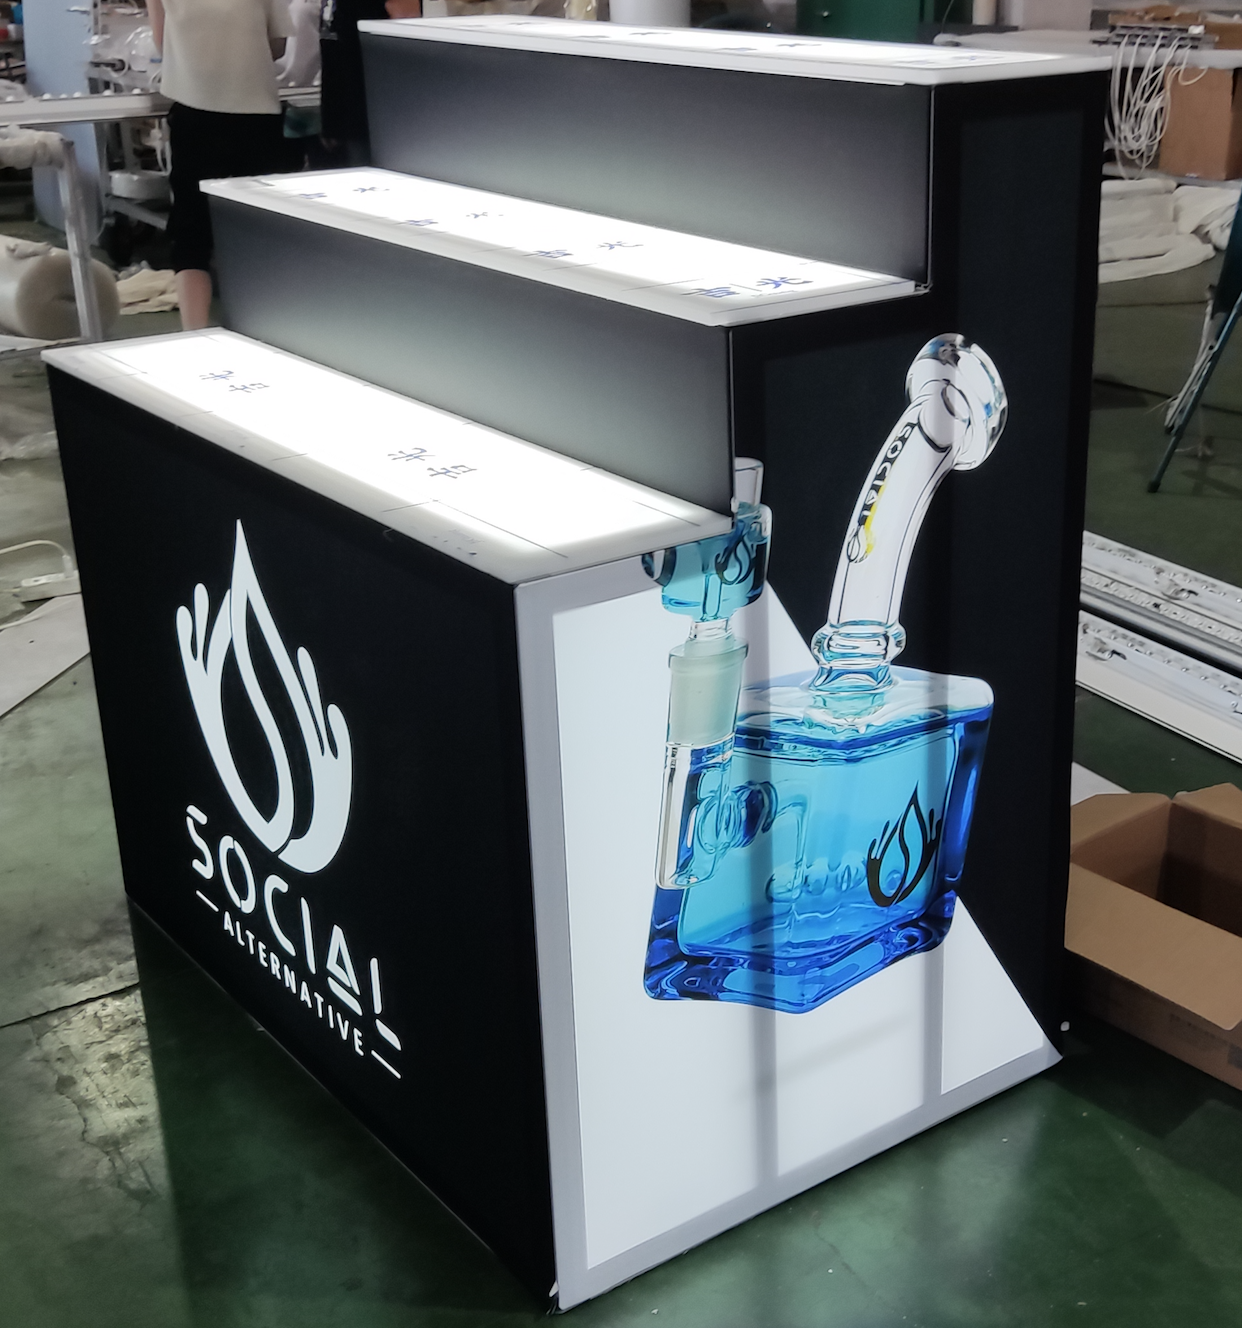 Exhibition Use Trade Show Table And Display Fixtures For Retails Stores